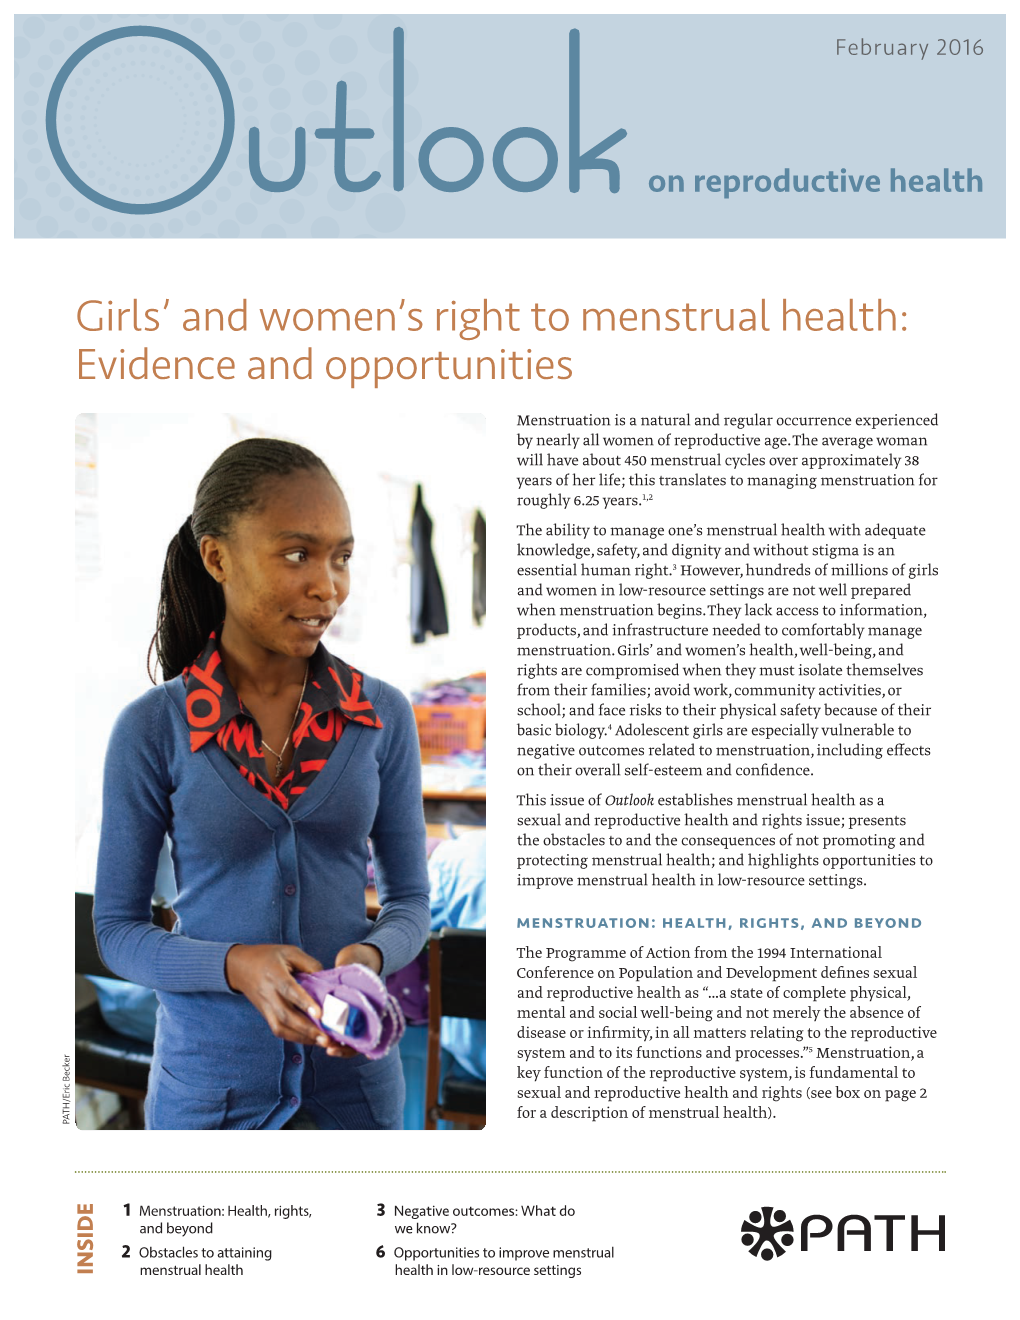 Girls' and Women's Right to Menstrual Health: Evidence and Opportunities